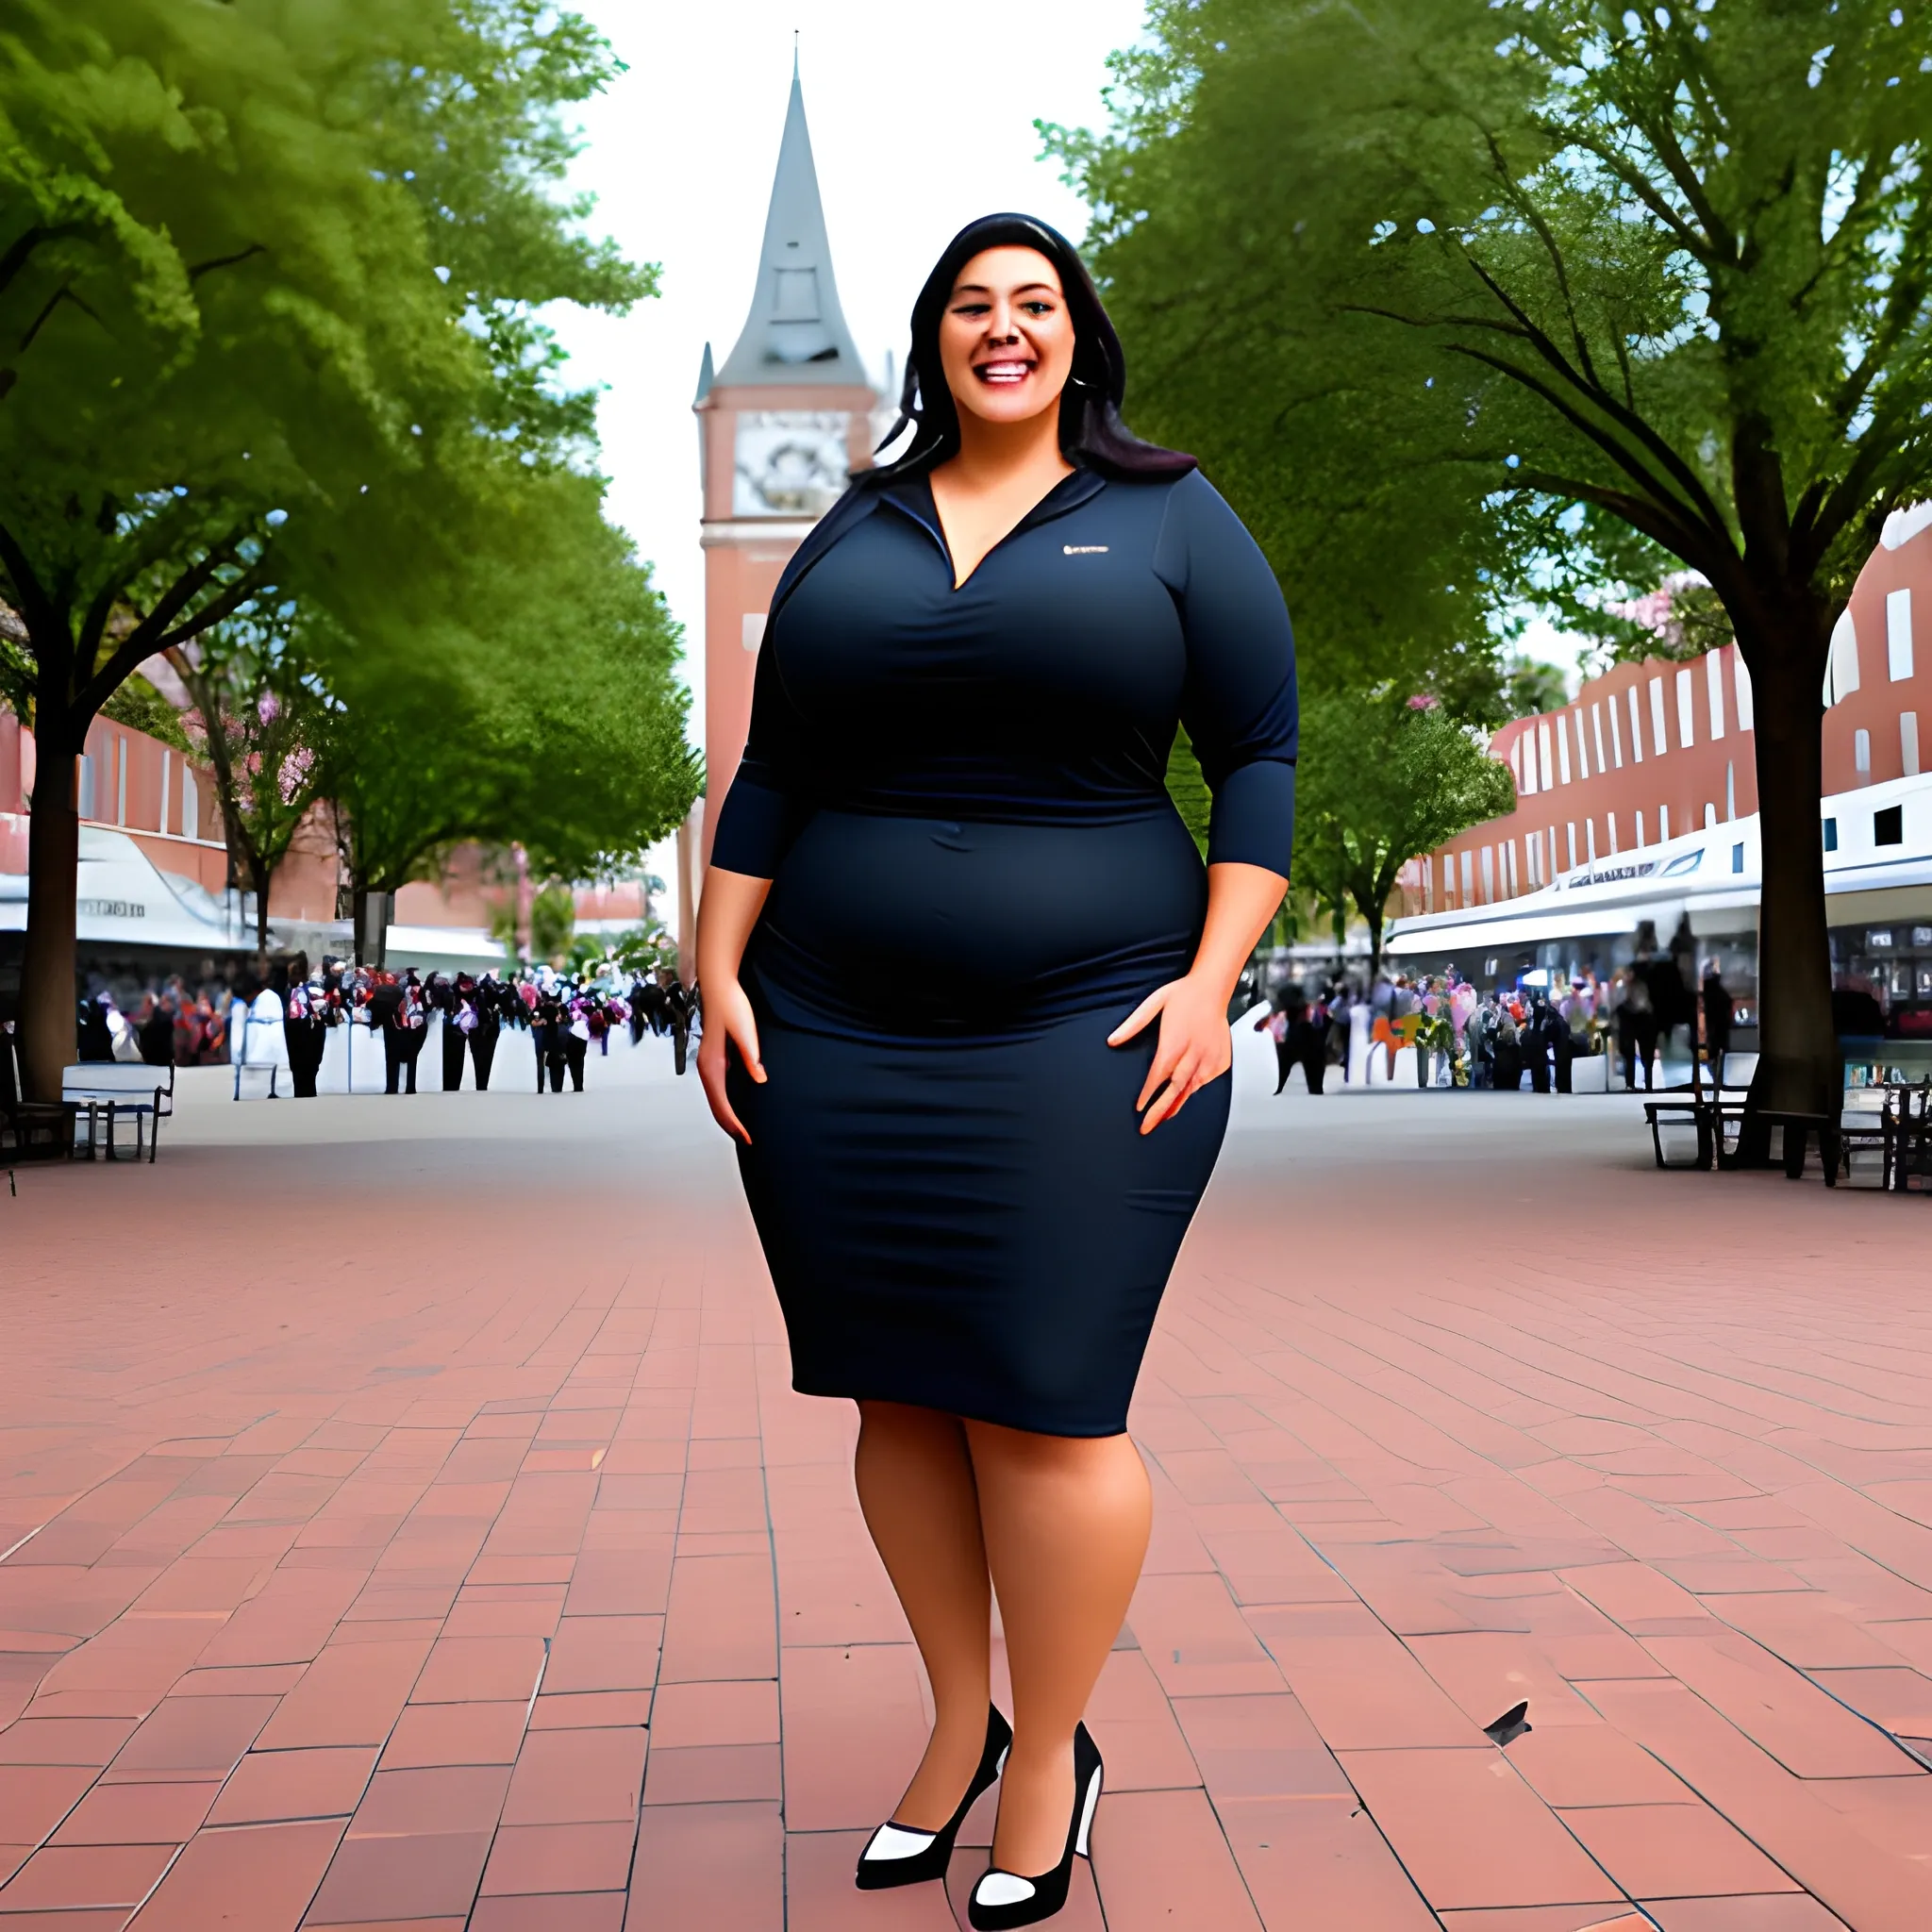 ben real recommends plus size latina women pic